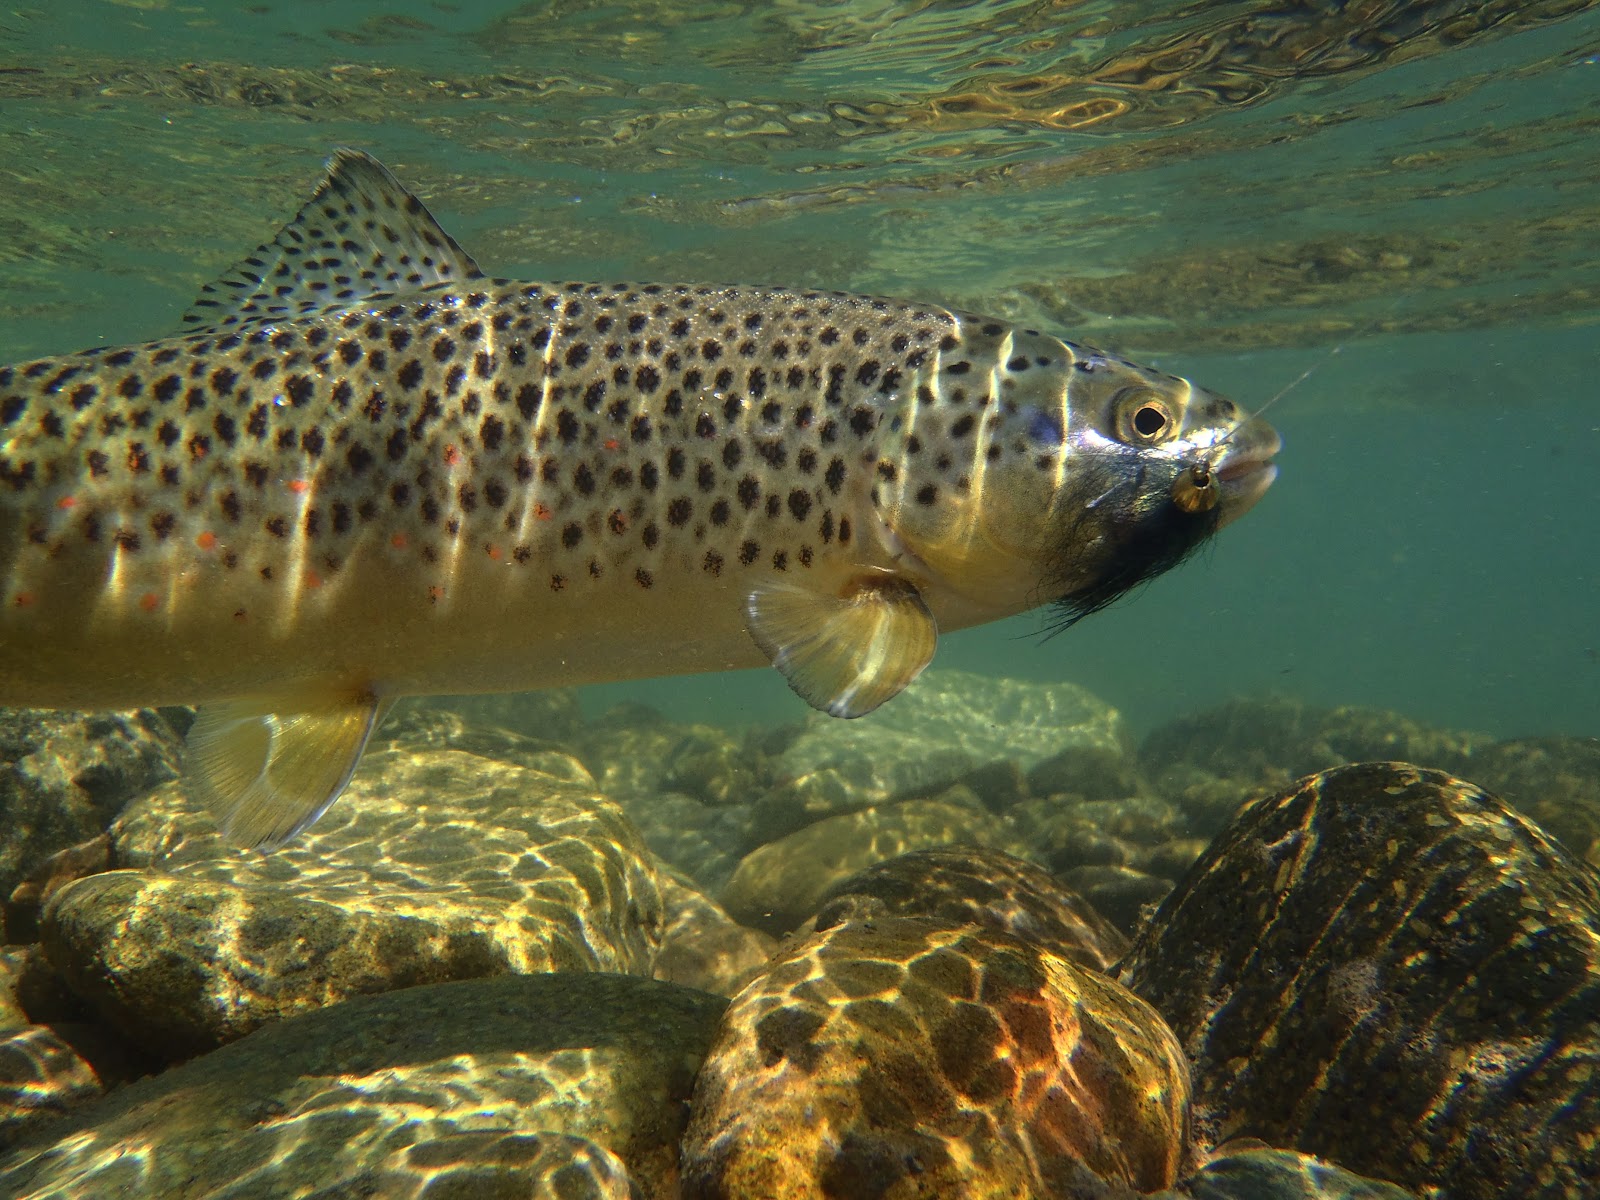 Free download Brown Trout Wallpaper The rivers brown trout go [1600x1200] for your Desktop, Mobile & Tablet. Explore Brown Trout Wallpaper. Brown Trout Wallpaper, HD Trout Wallpaper, Trout Wallpaper